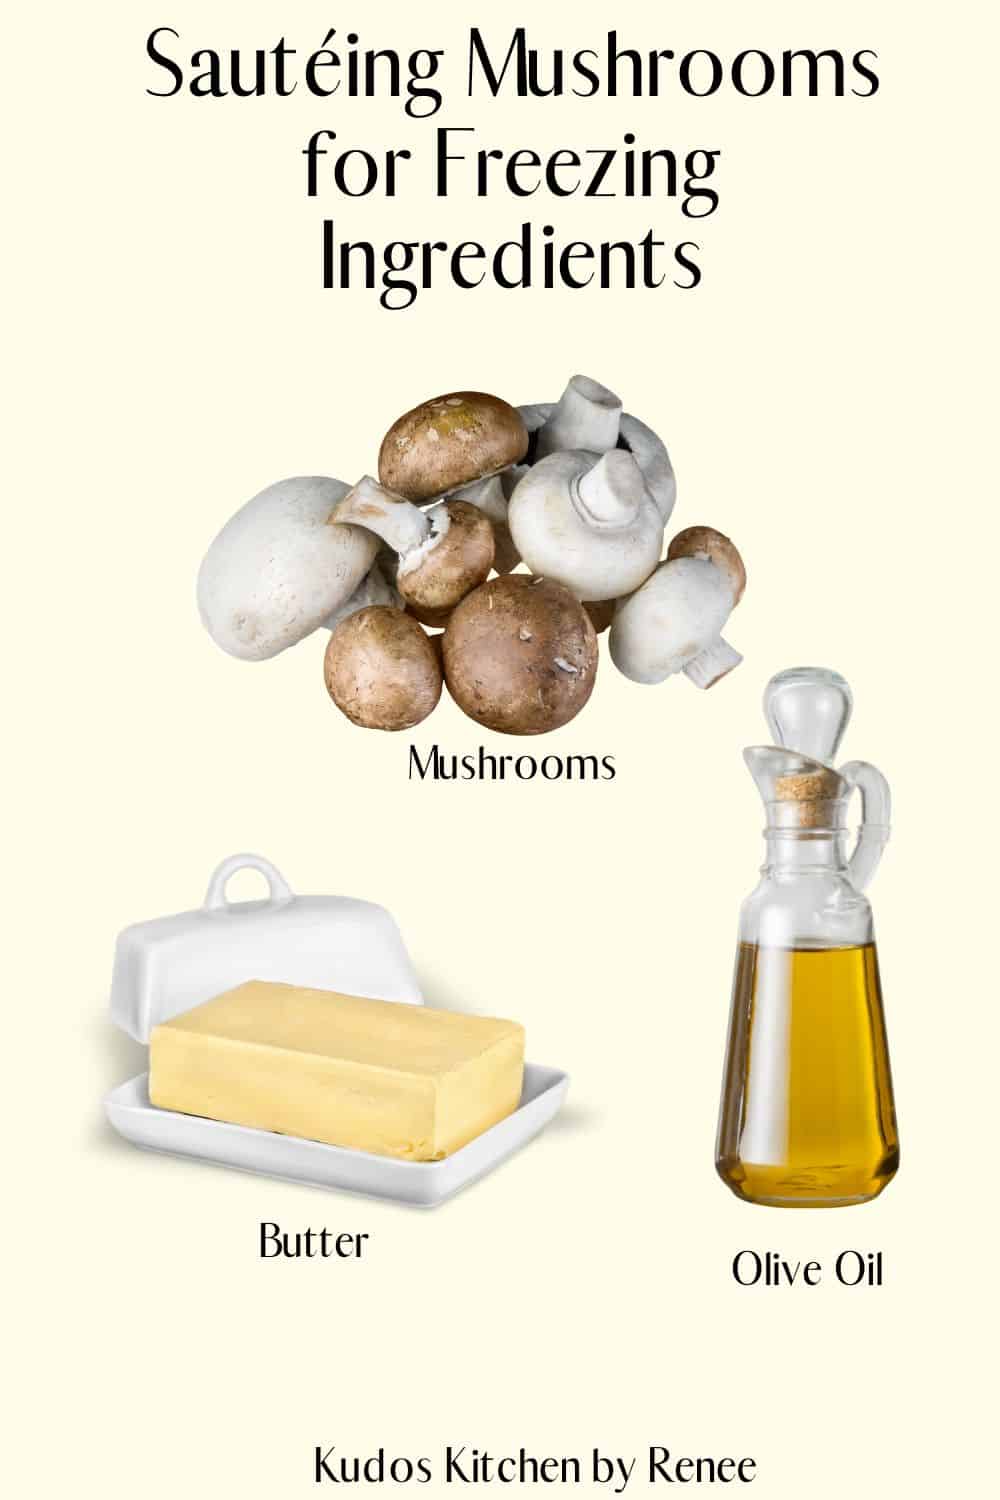 Visual ingredient list for how to sauté mushrooms for freezing.